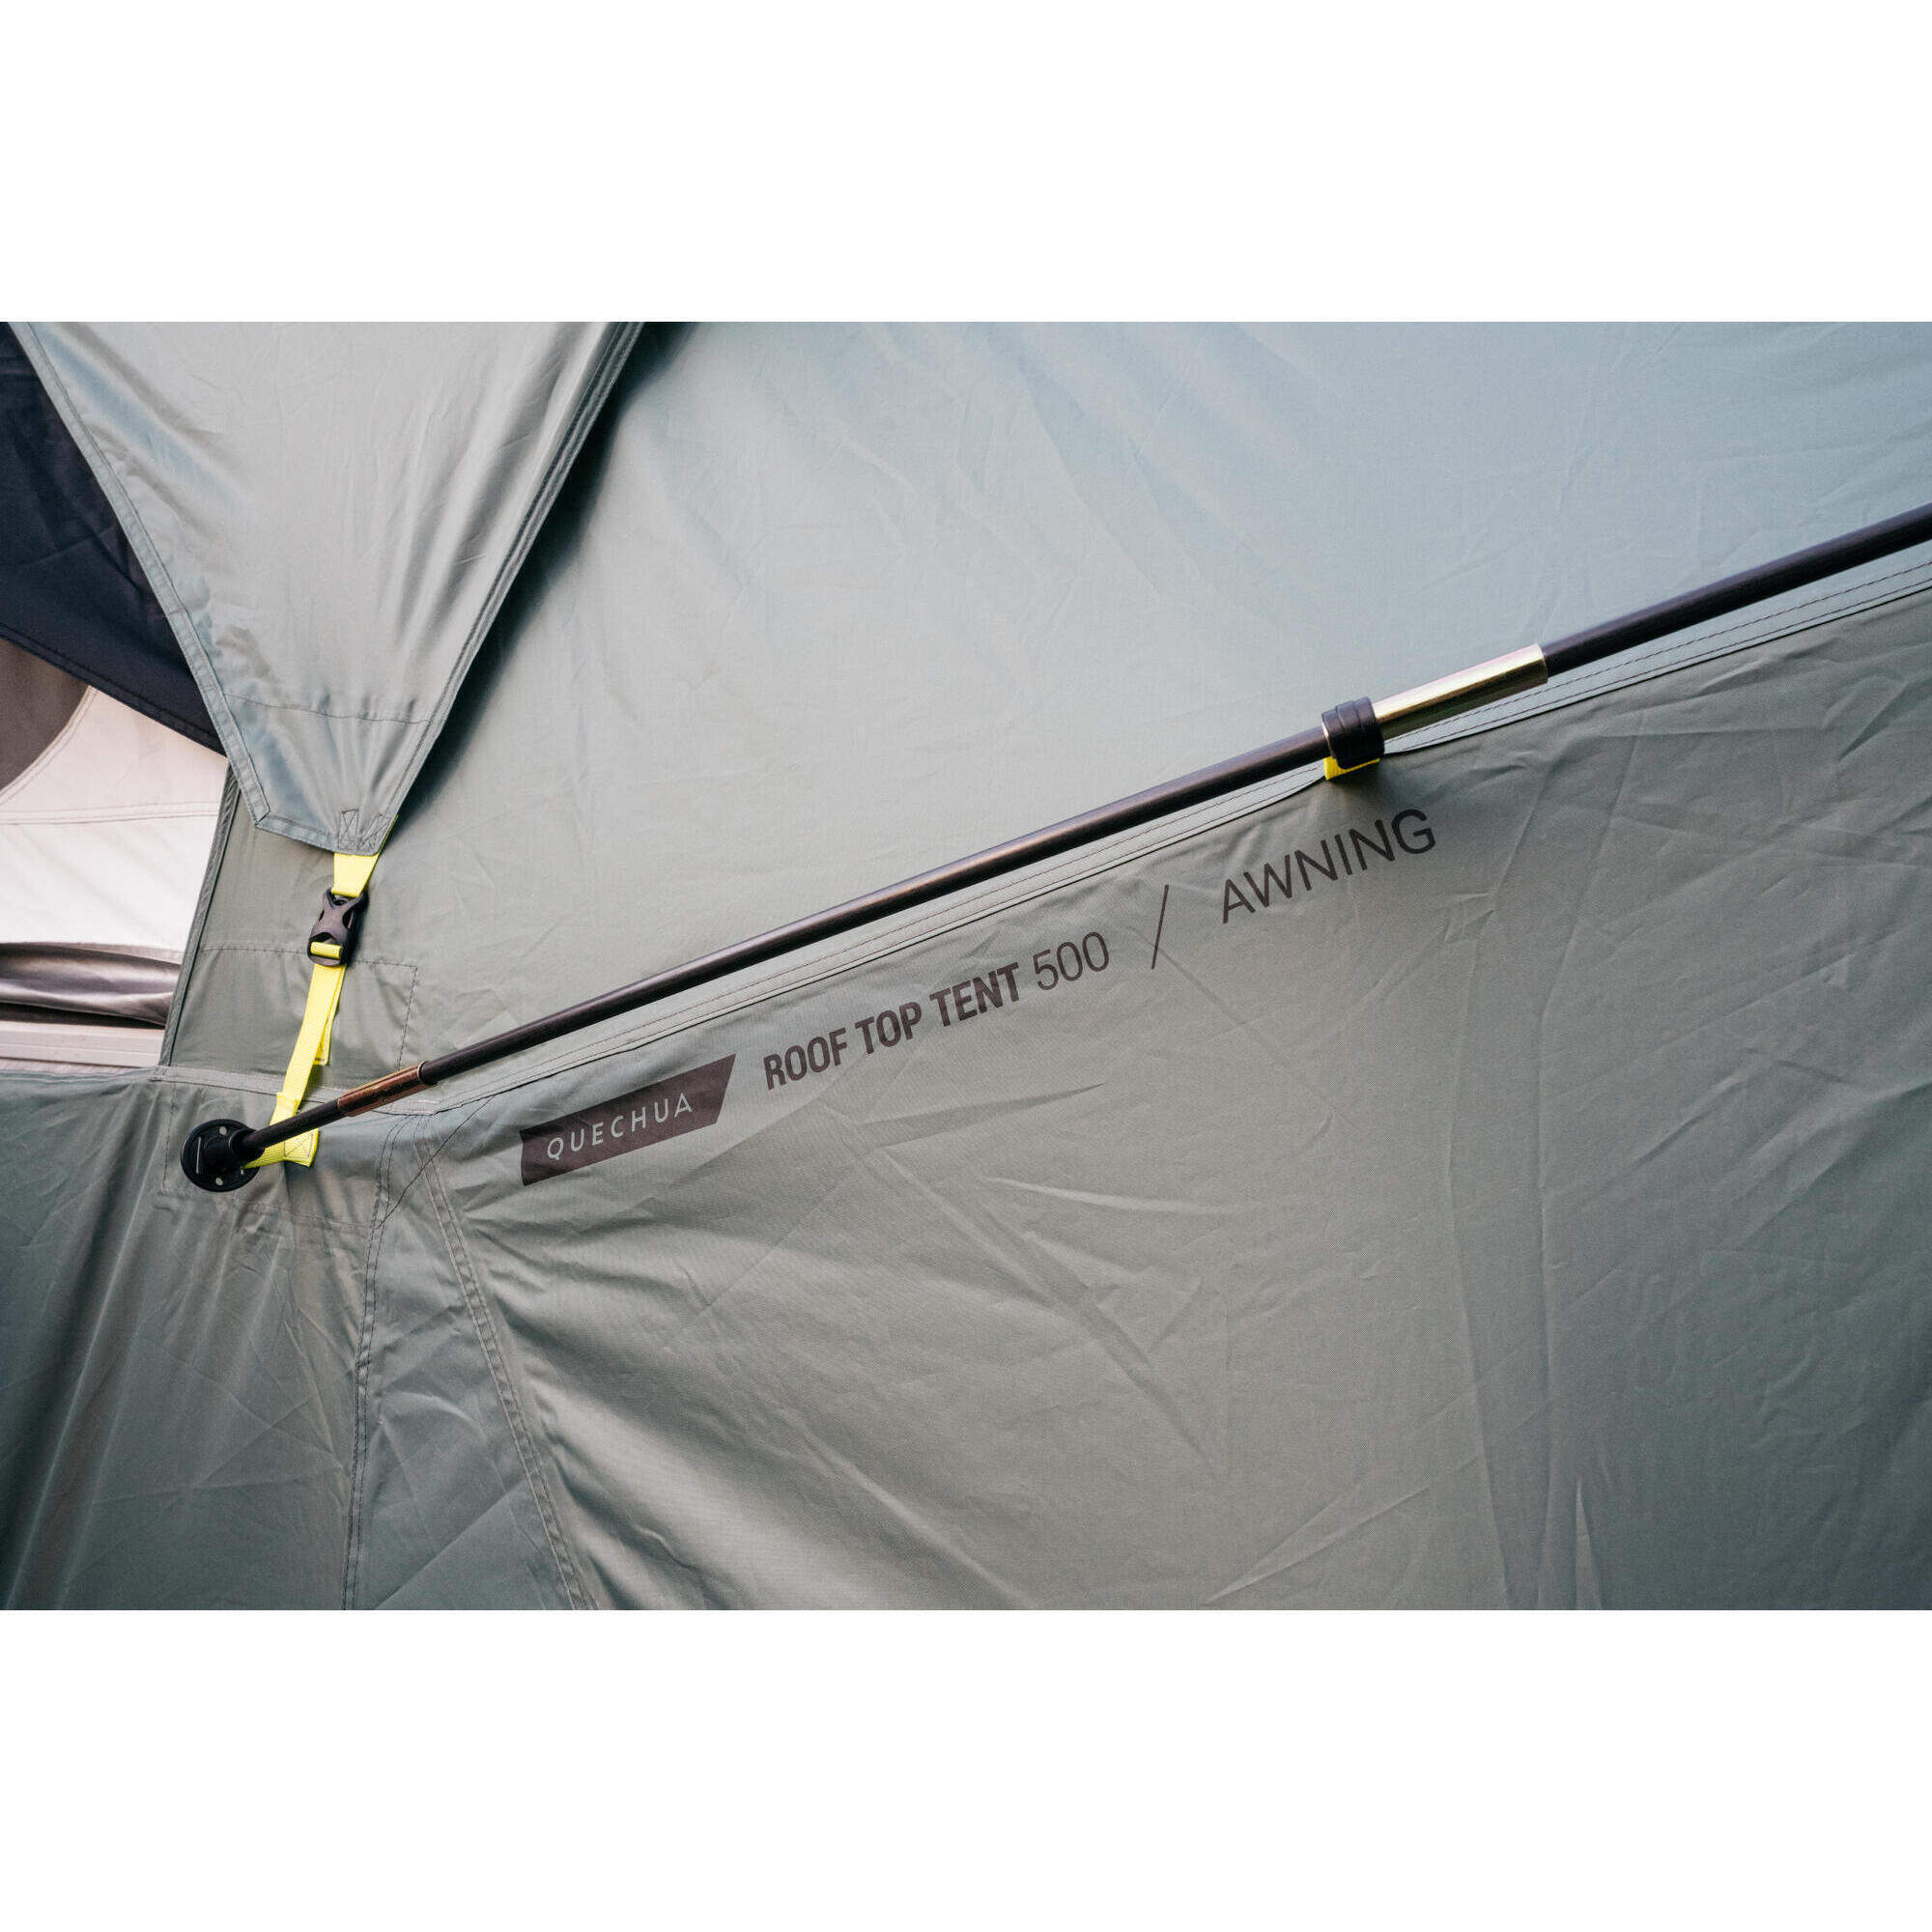 Roof Tent Connected Awning MH500 2P 18/18